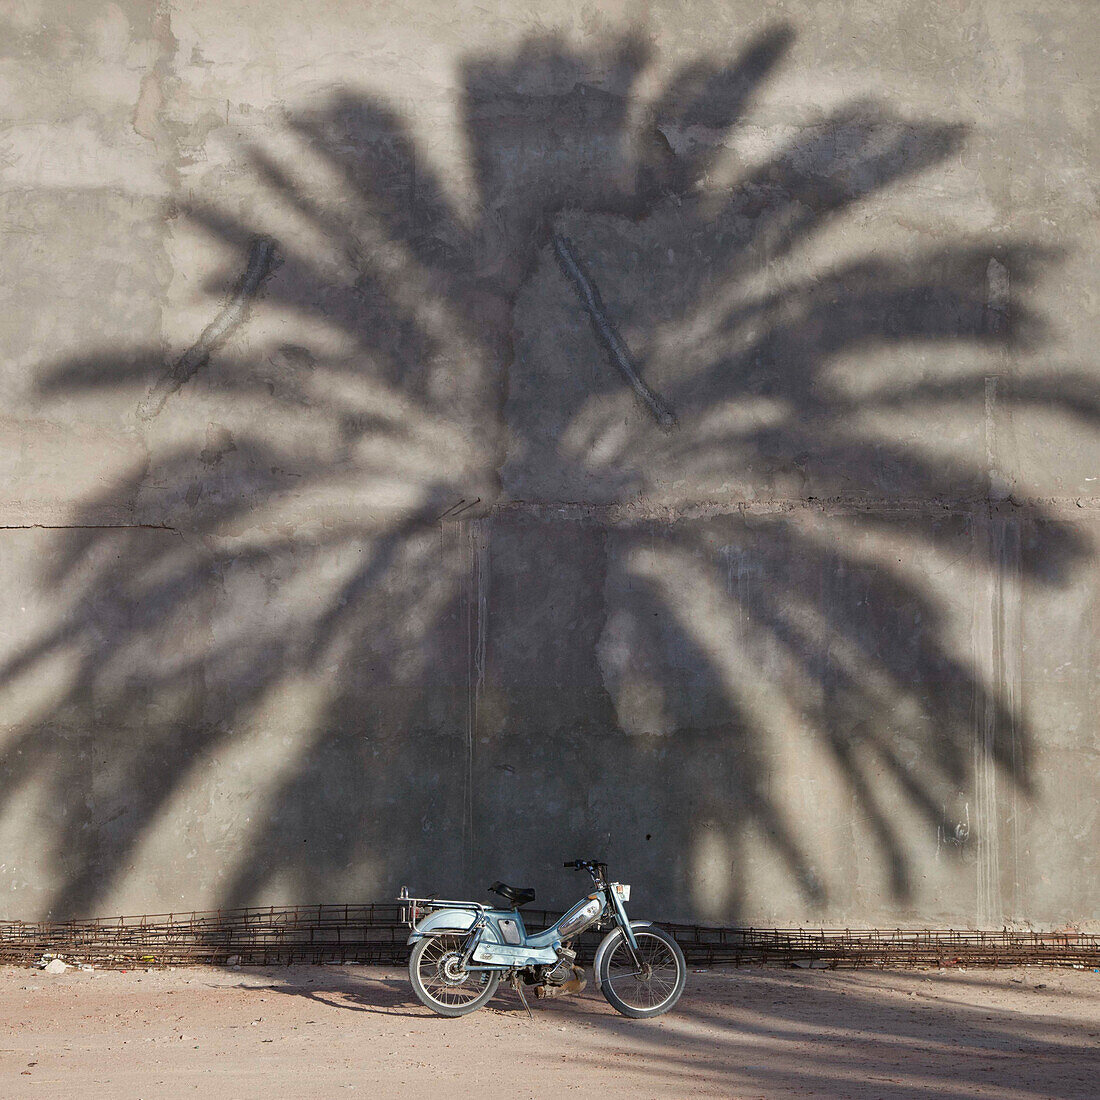 Moped in the shadow of a palm tree. Tunisia.